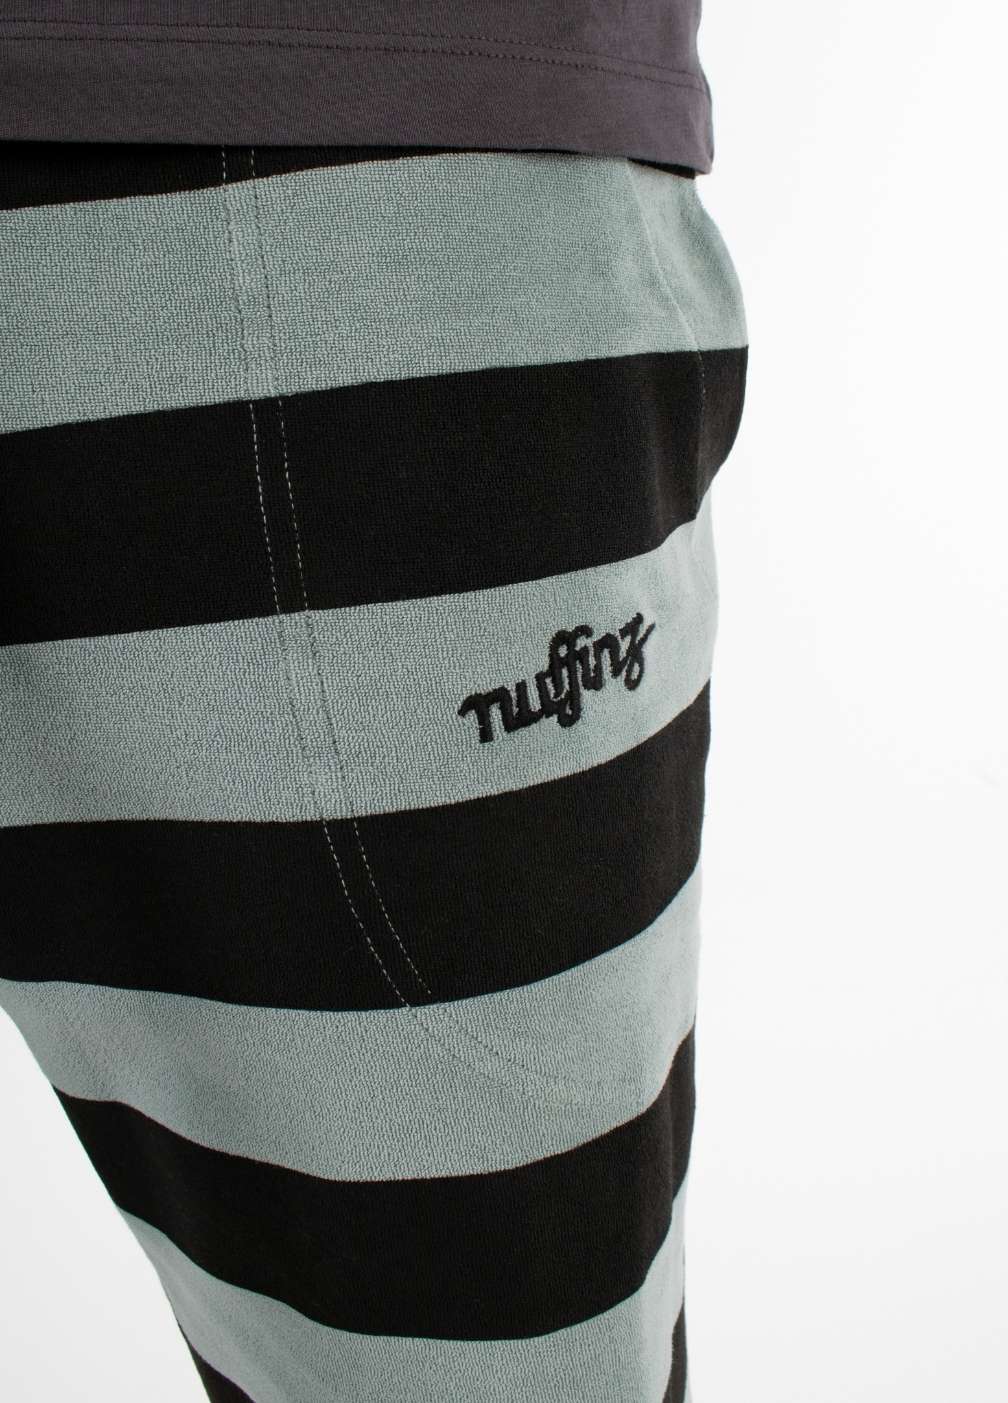 SILVER BLUE TOWEL SHORTS ST closeup - nuffinz logo - men's shorts with front pockets